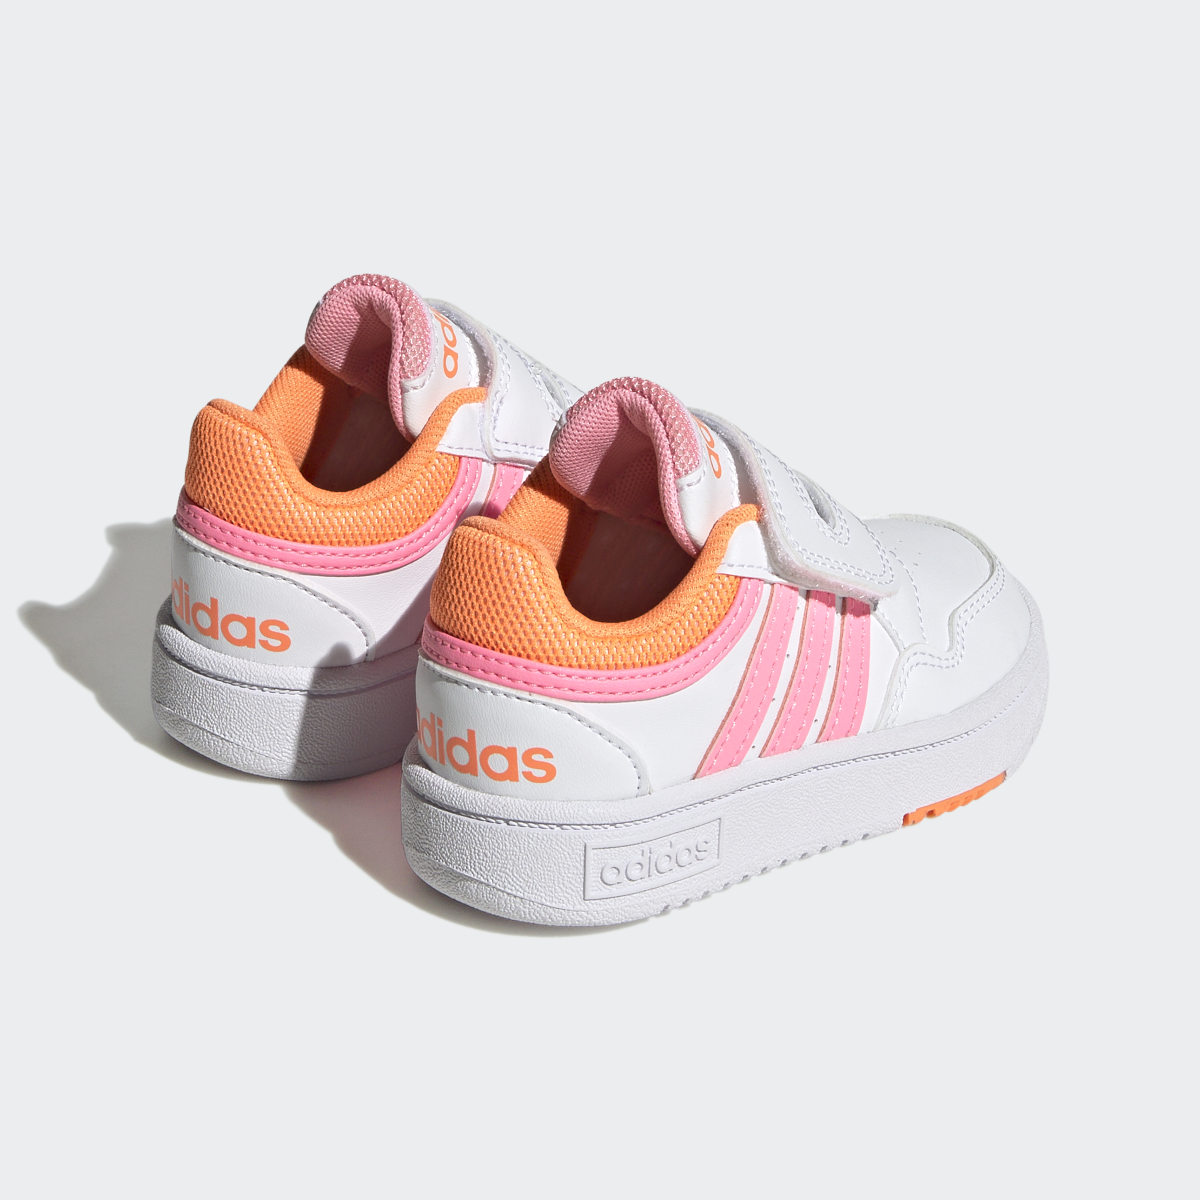 Adidas Hoops Shoes. 6